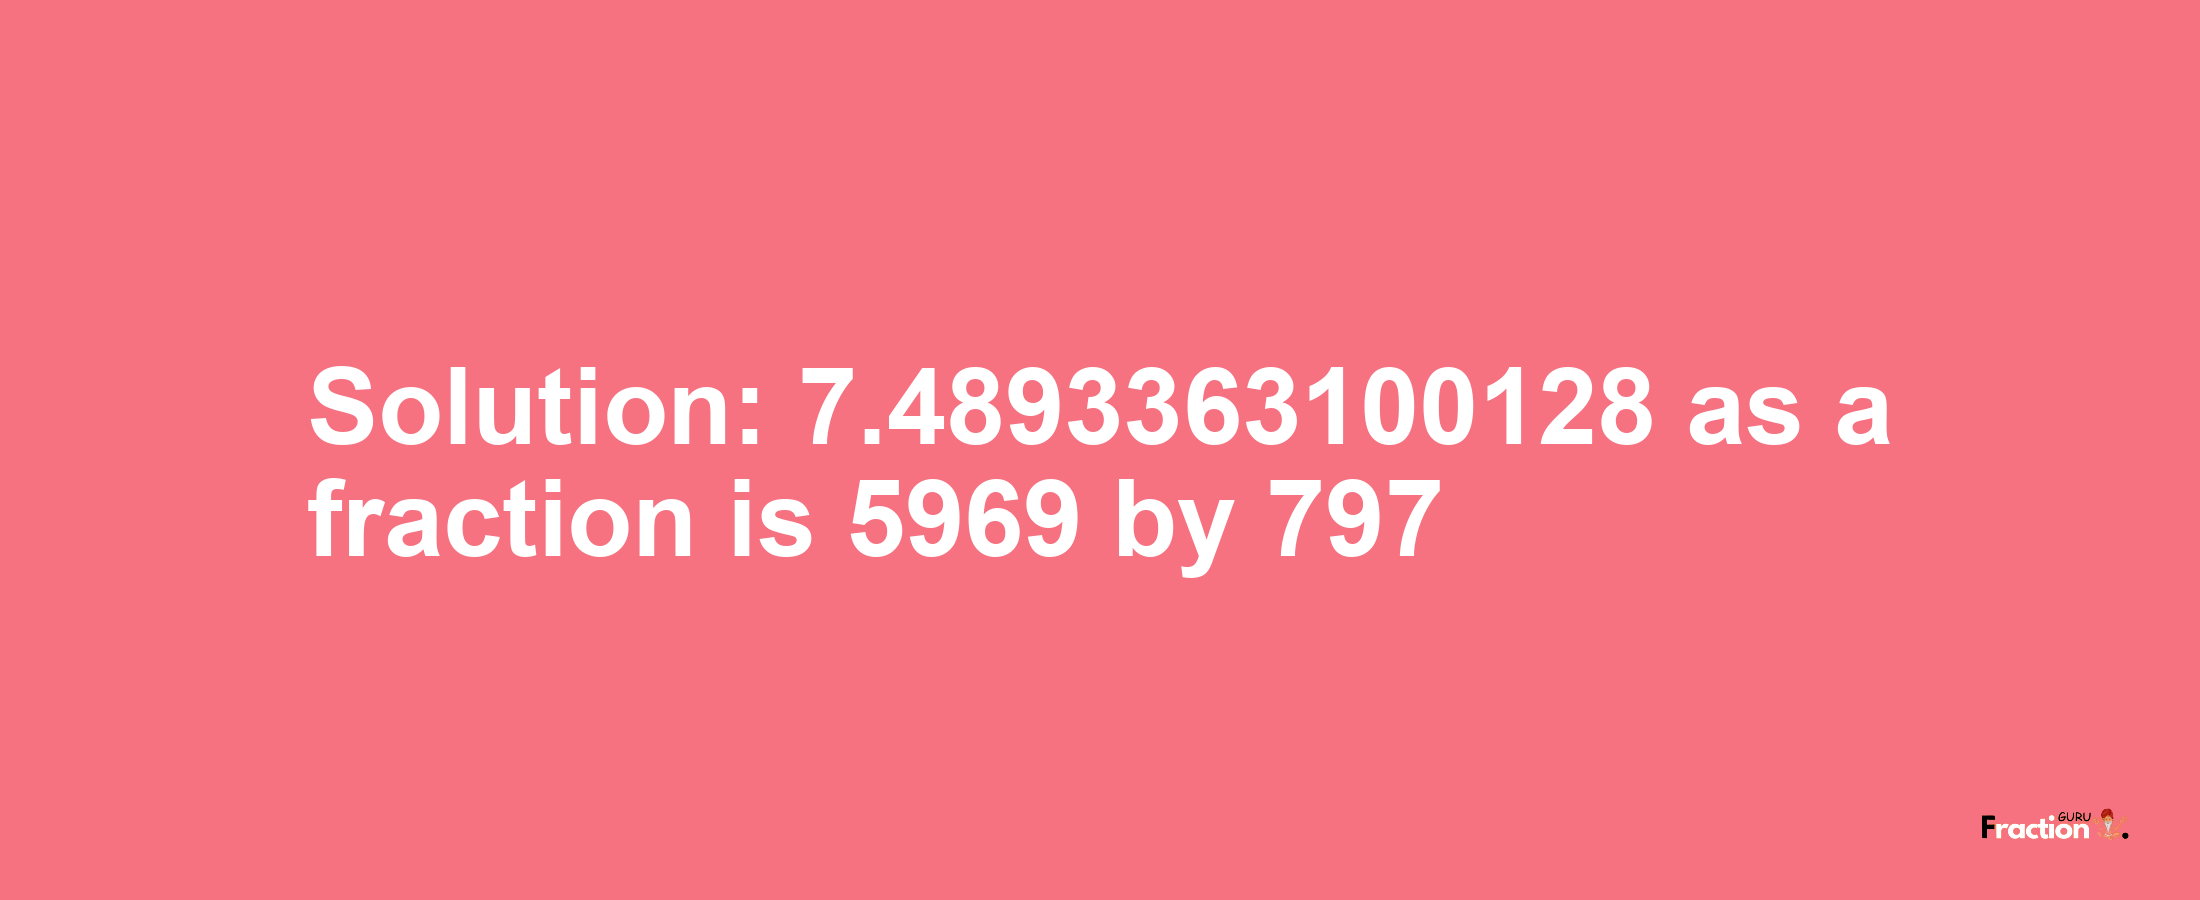 Solution:7.4893363100128 as a fraction is 5969/797